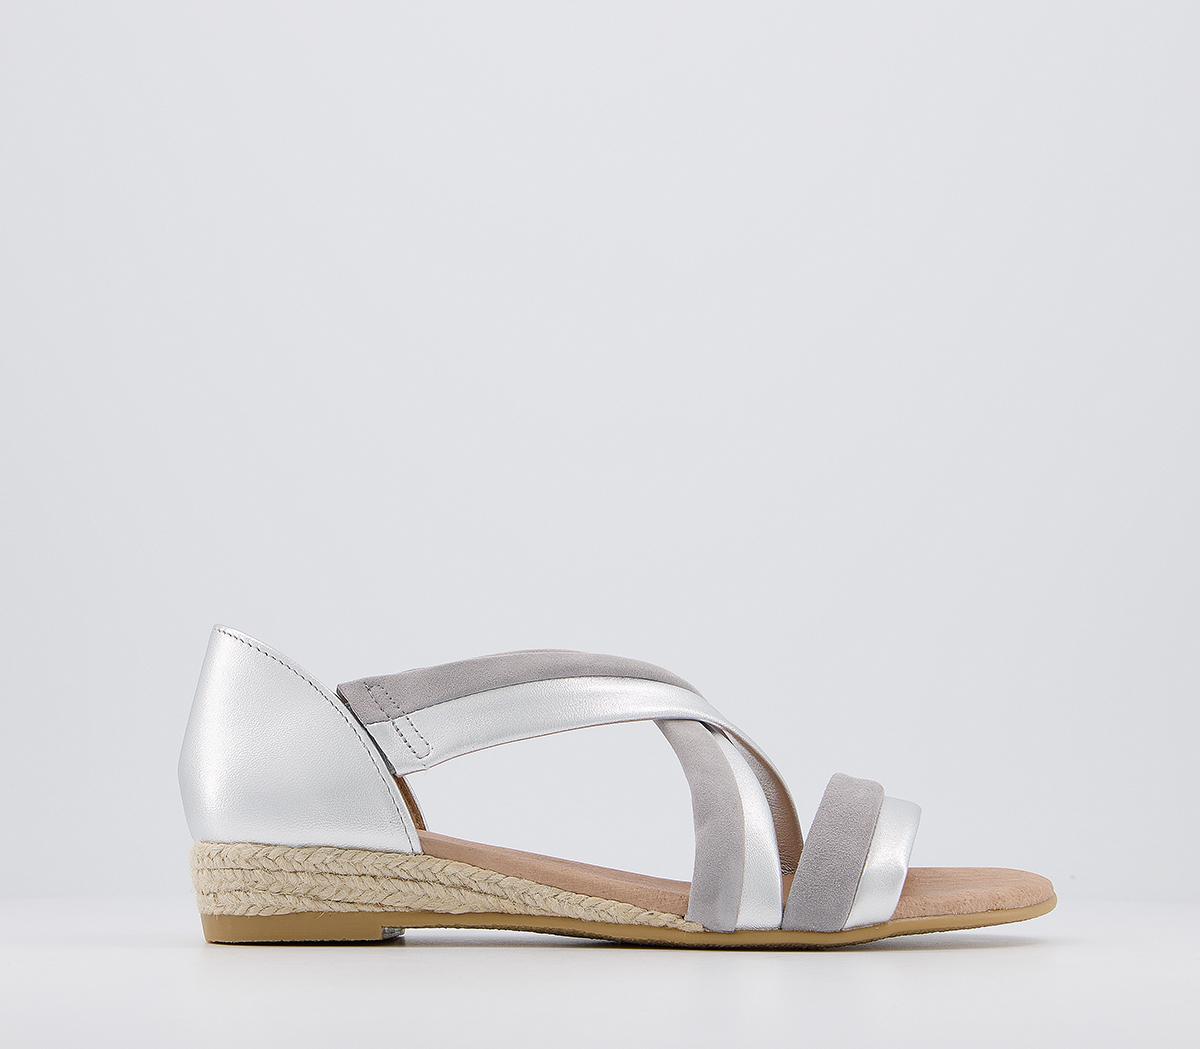 OFFICEHallie Cross Strap Espadrille SandalsSilver Leather And Grey Suede Mixed Straps